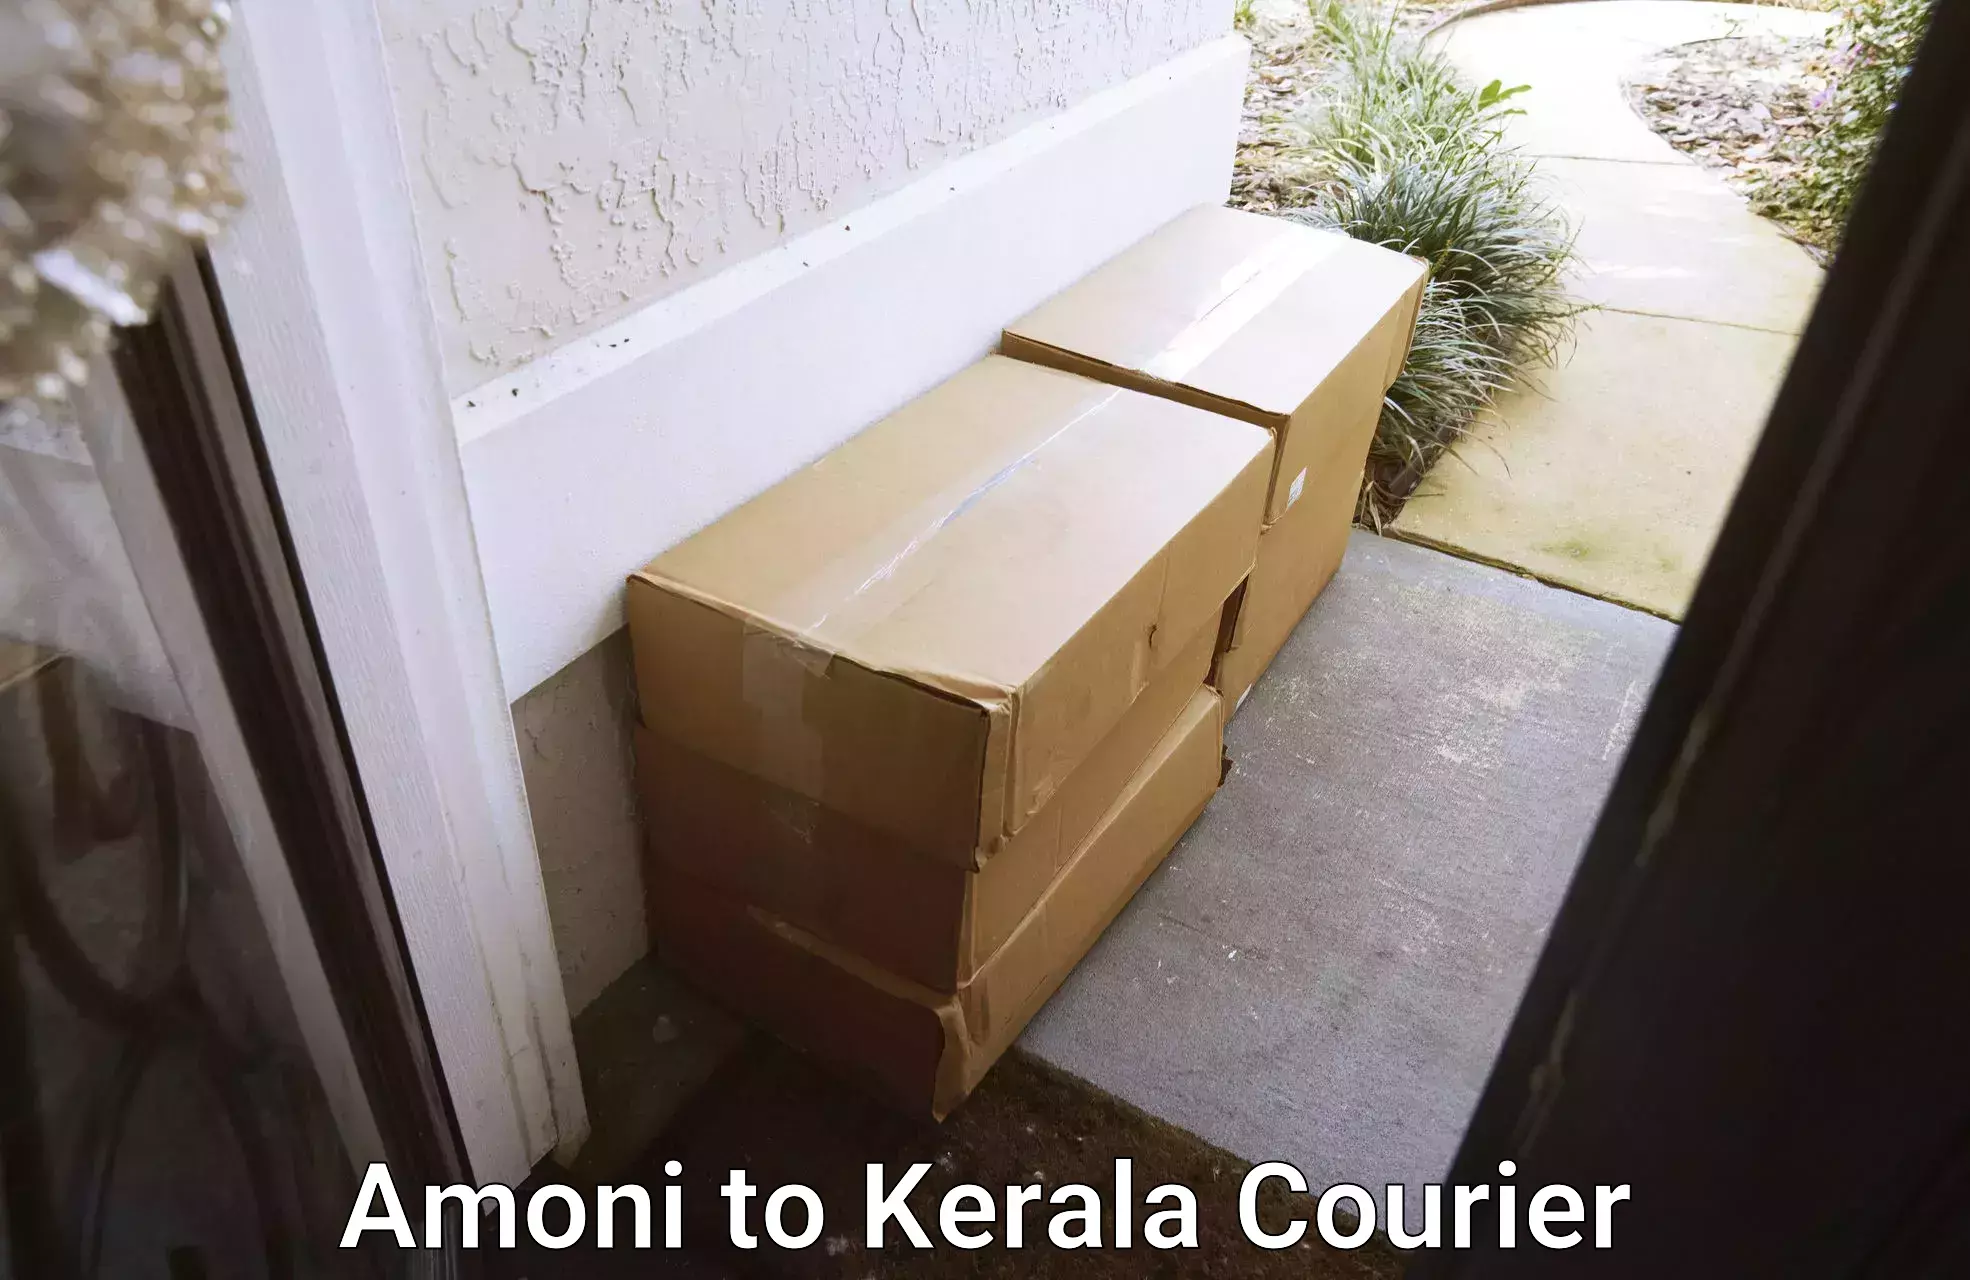 Express delivery solutions in Amoni to Kochi